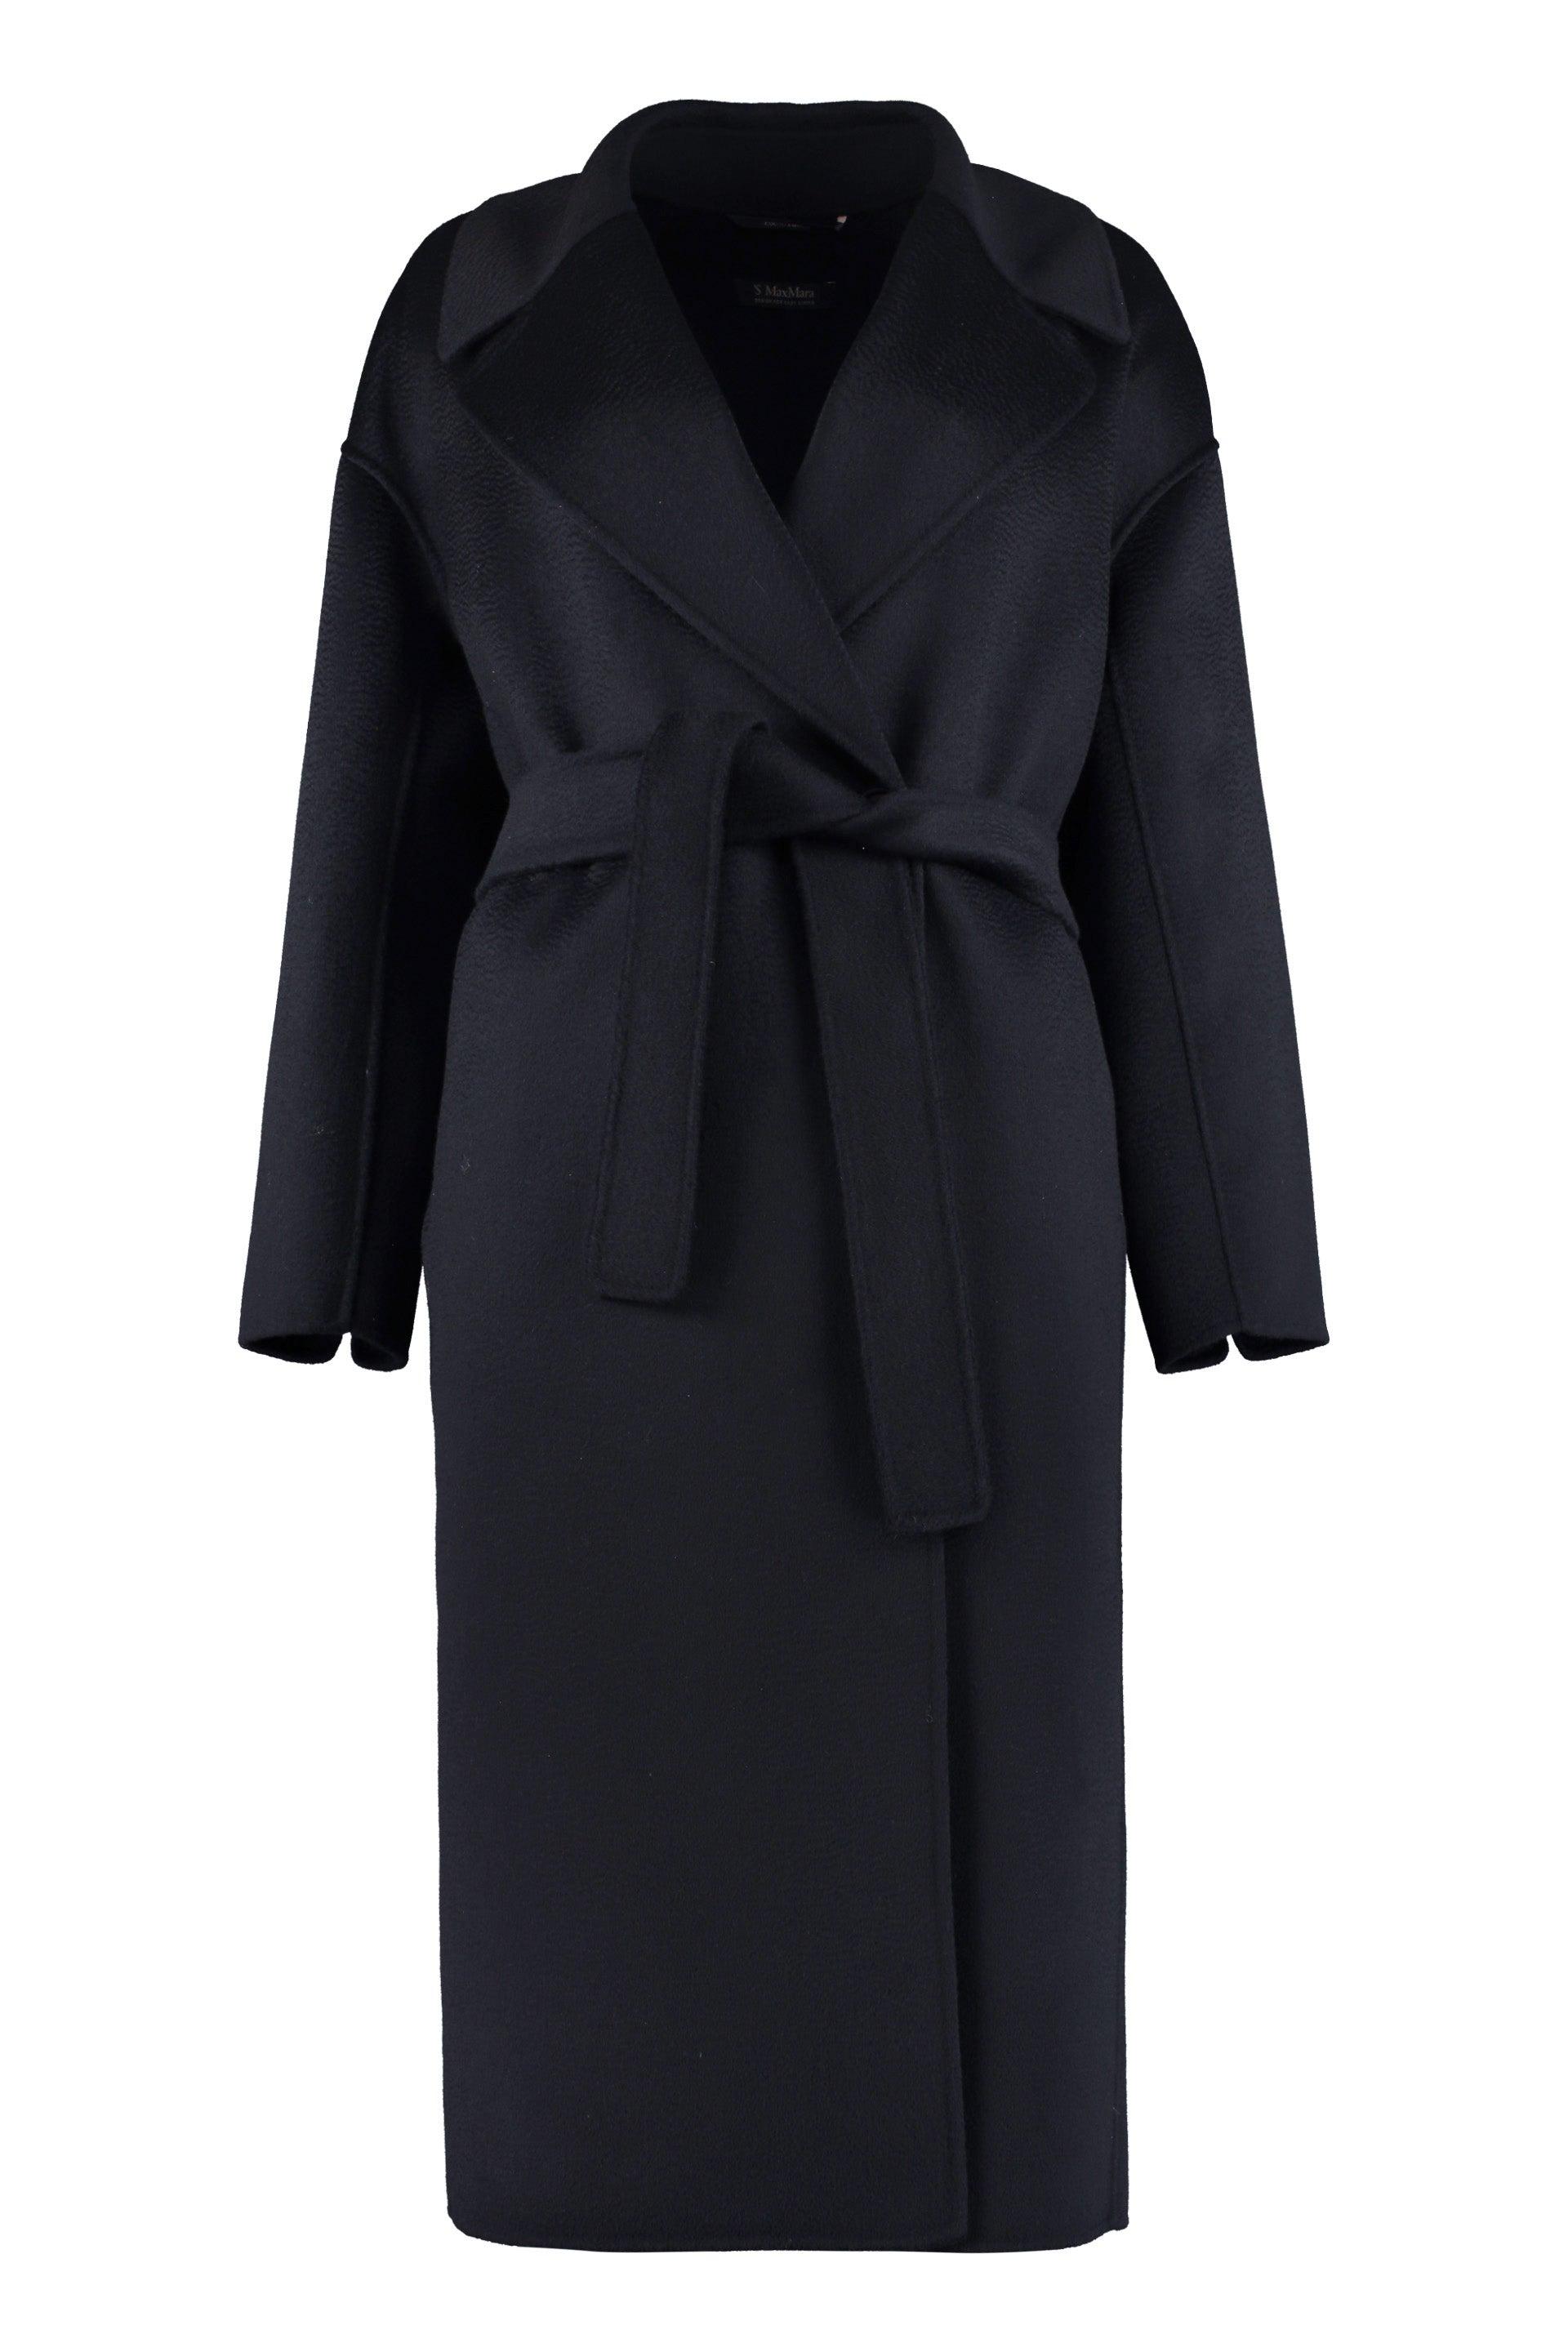 Max Mara Simone Double-breasted Wool And Cashmere Coat in Navy (Black) -  Save 80% | Lyst